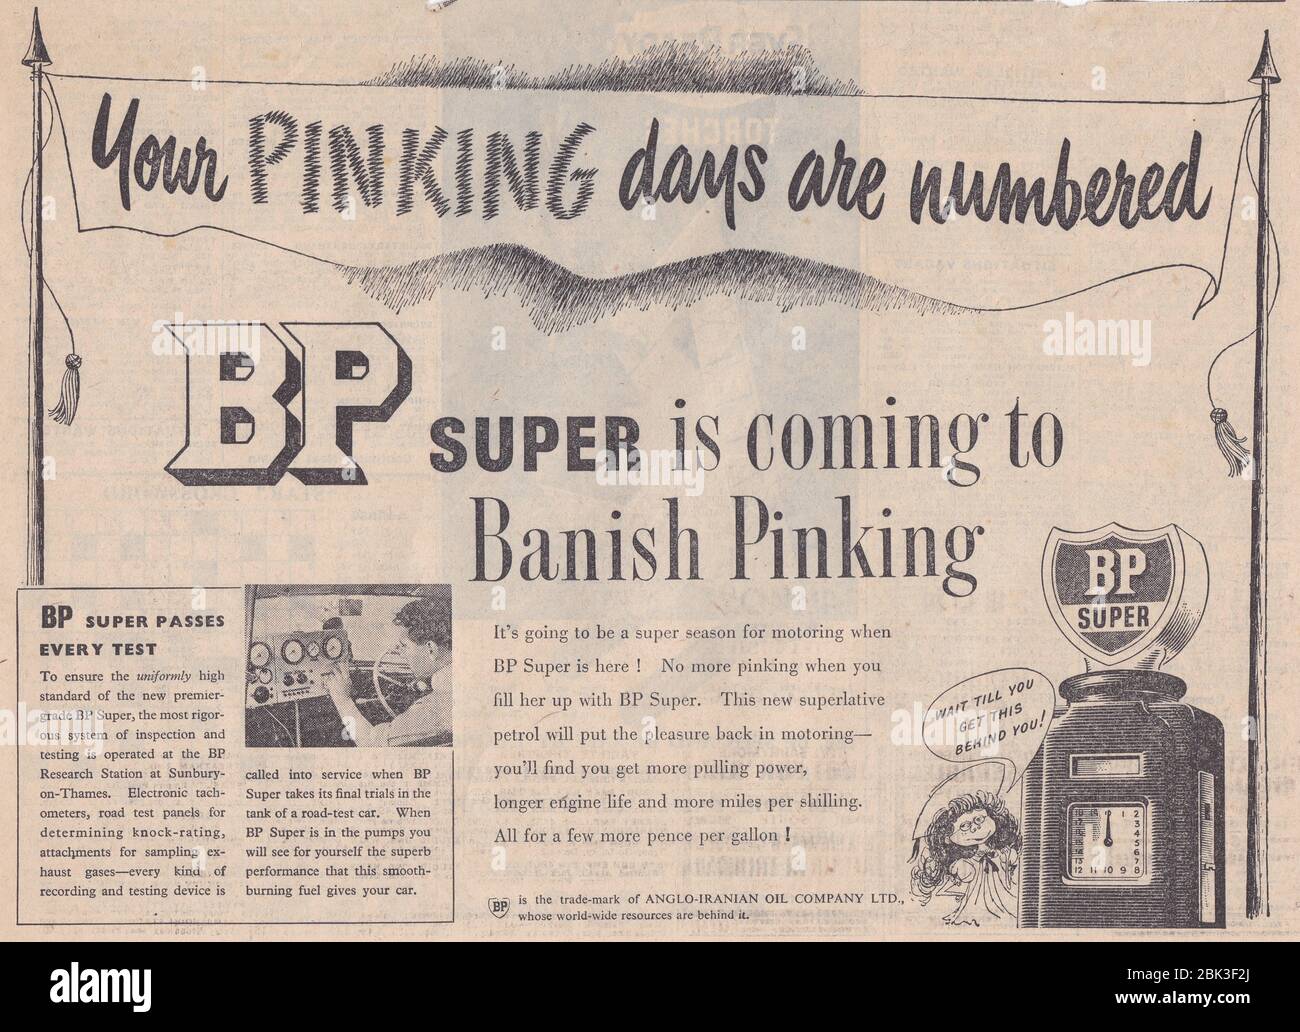 1950s newspaper advert for BP Super fuel - Your Pinking days are numbered - BP Super is coming to Banish Pinking. Stock Photo